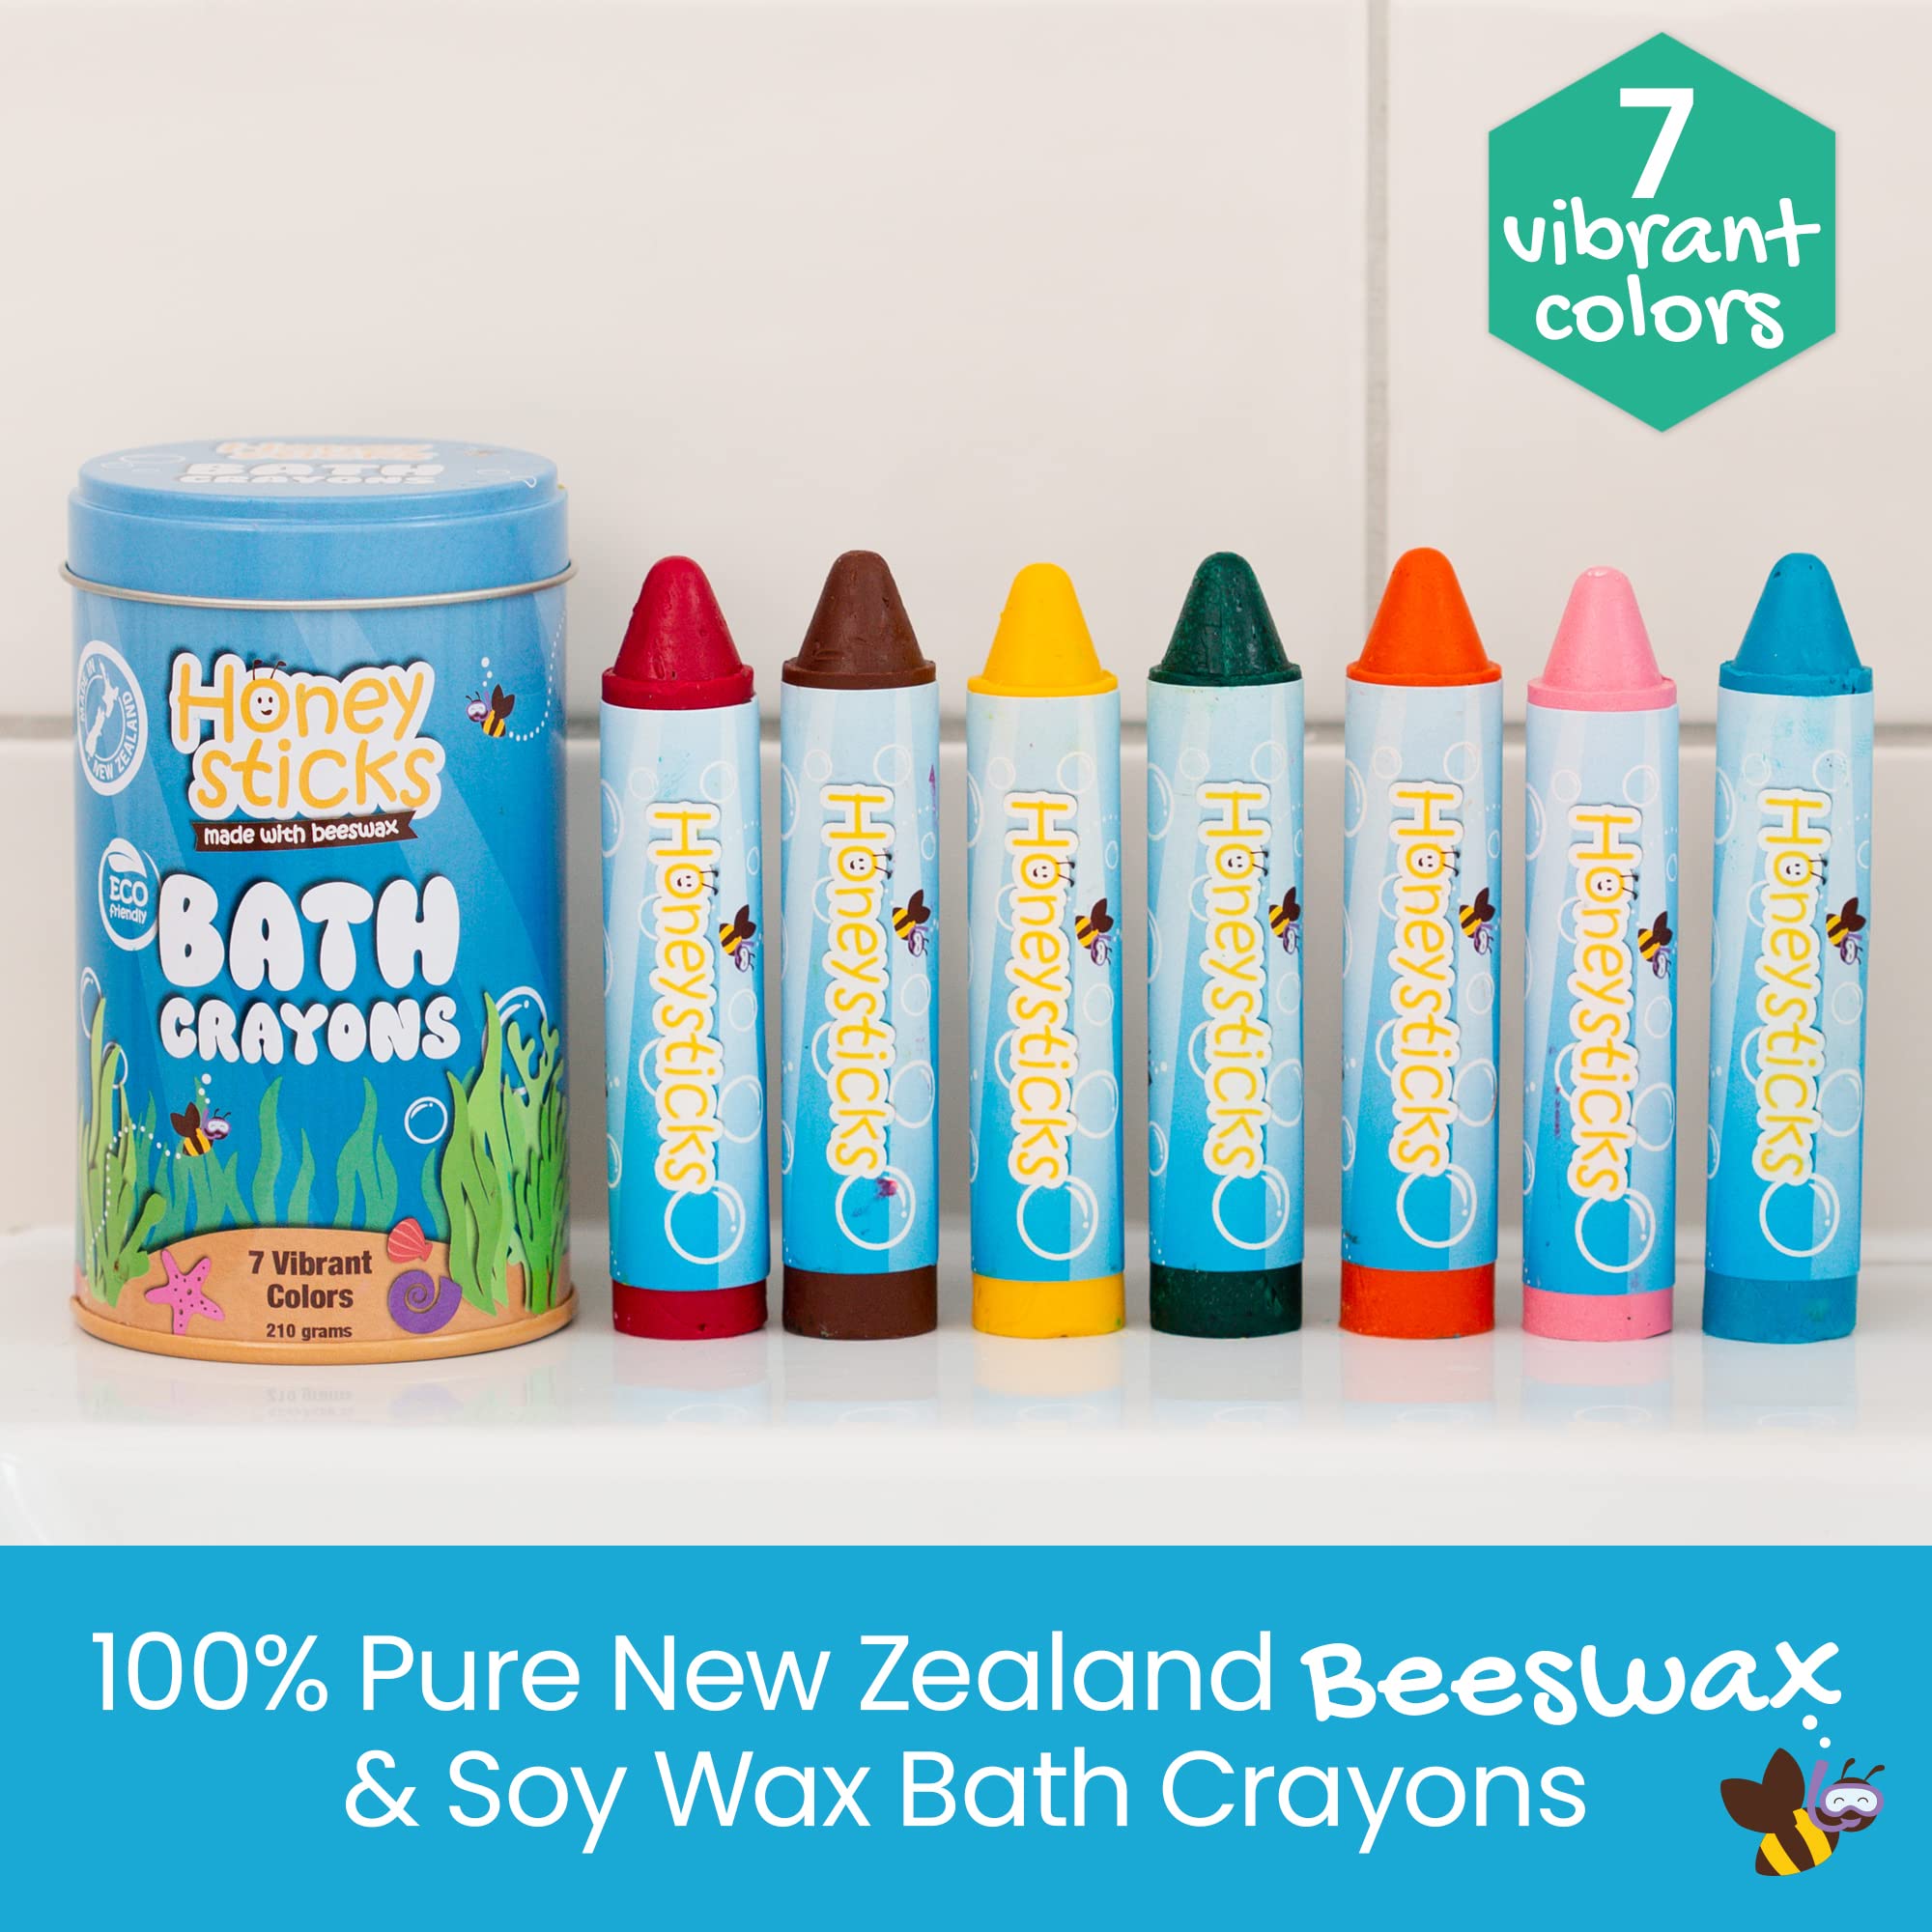 Honeysticks Bath Crayons for Toddlers & Kids - Handmade from Natural Beeswax for Non Toxic Bathtub Fun - Fragrance Free, Non-Irritating Bath Toys - Bright Colors and Easy to Hold - Washable - 7 Pack